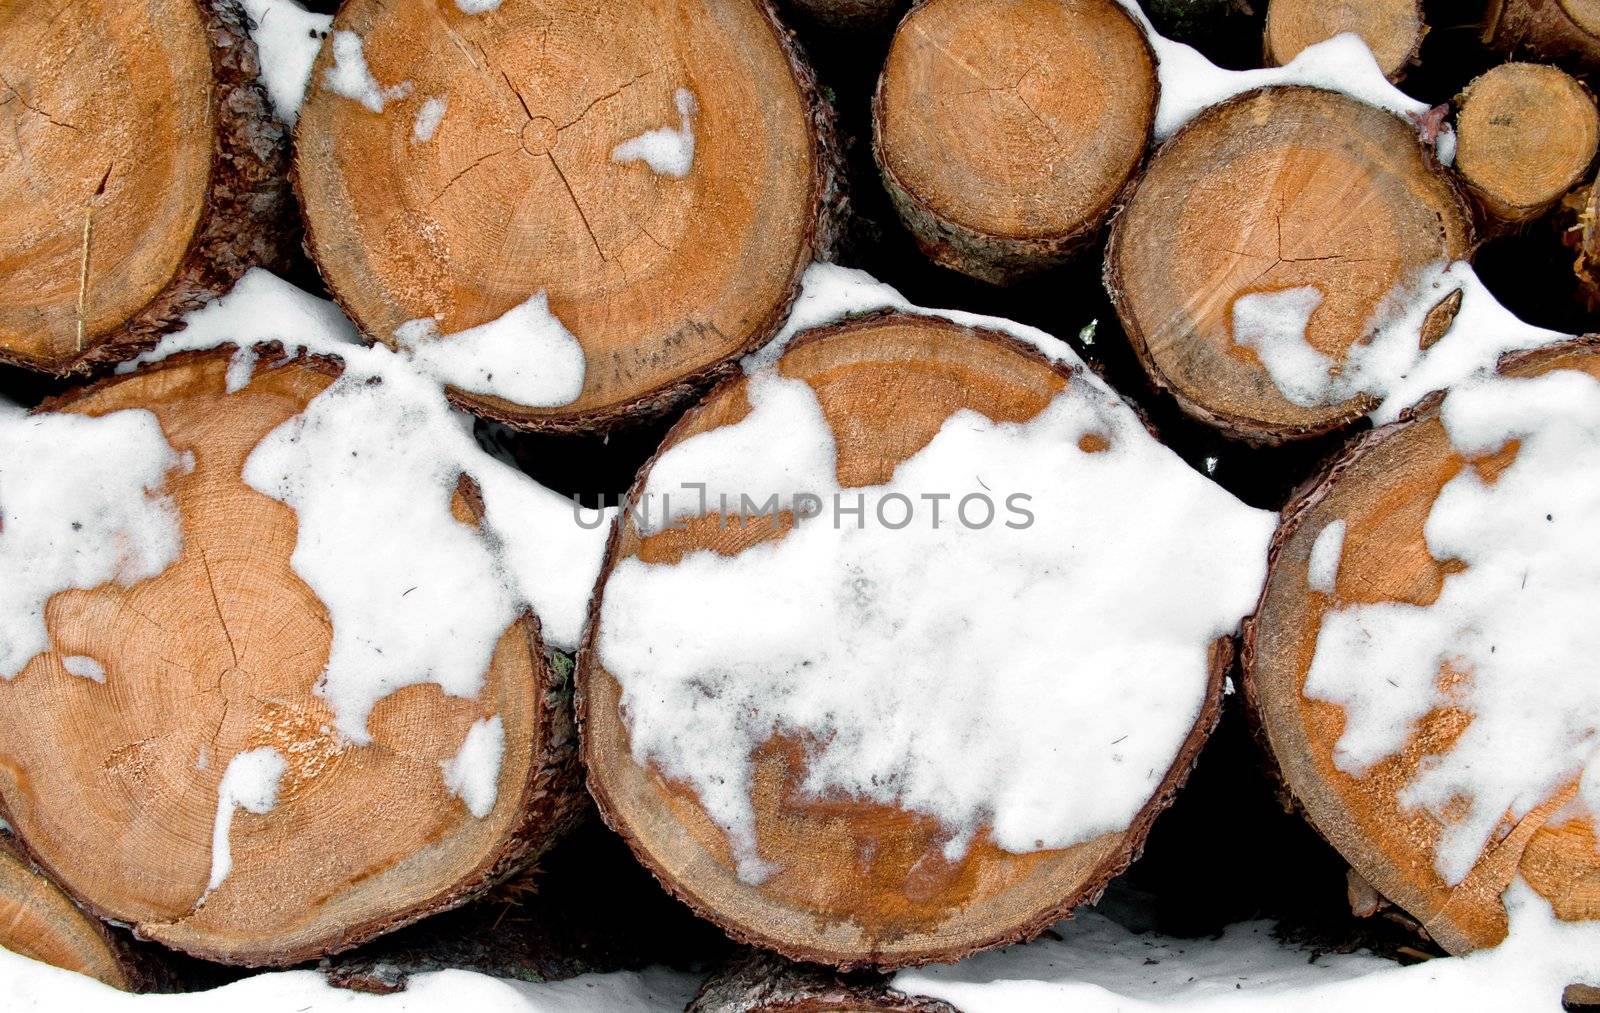 Snow log stack lumber in winter with snow